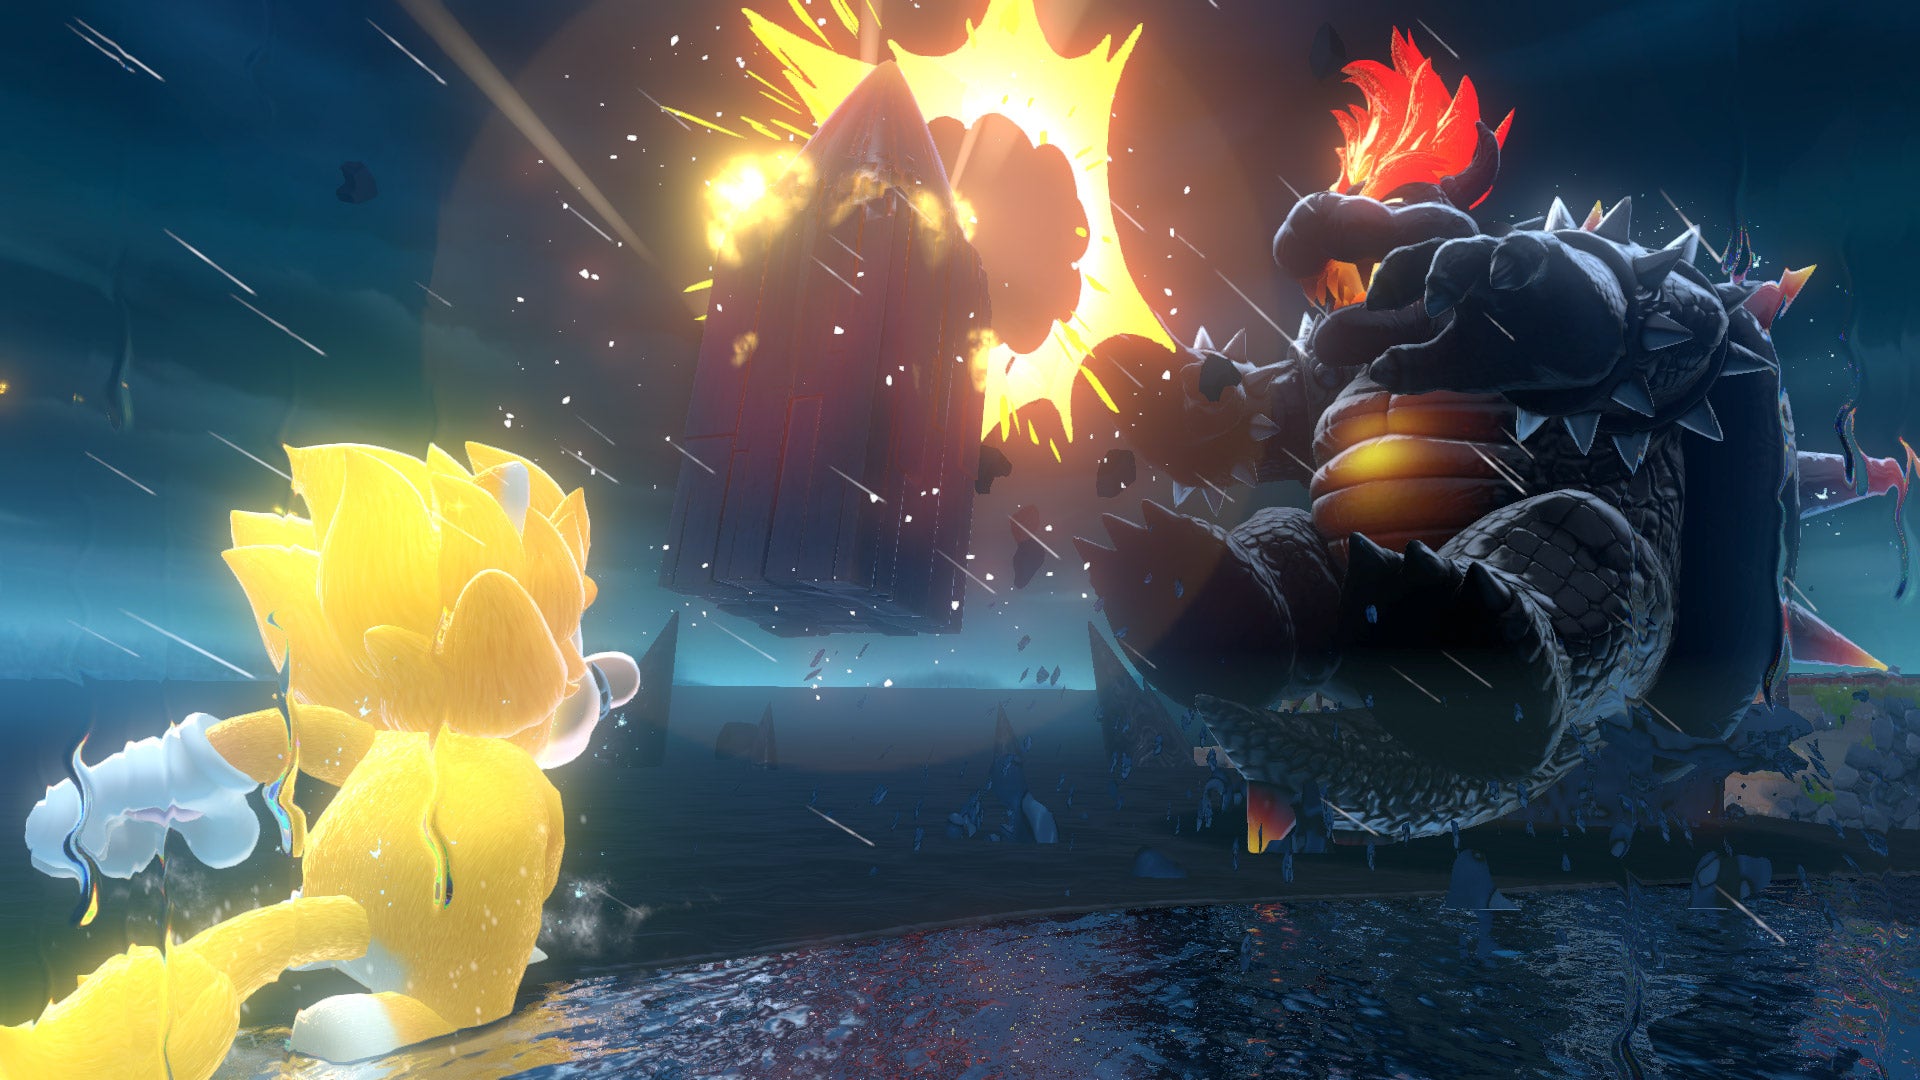 Super Mario 3D World: Bowser's Fury keeps stressing me out - Polygon